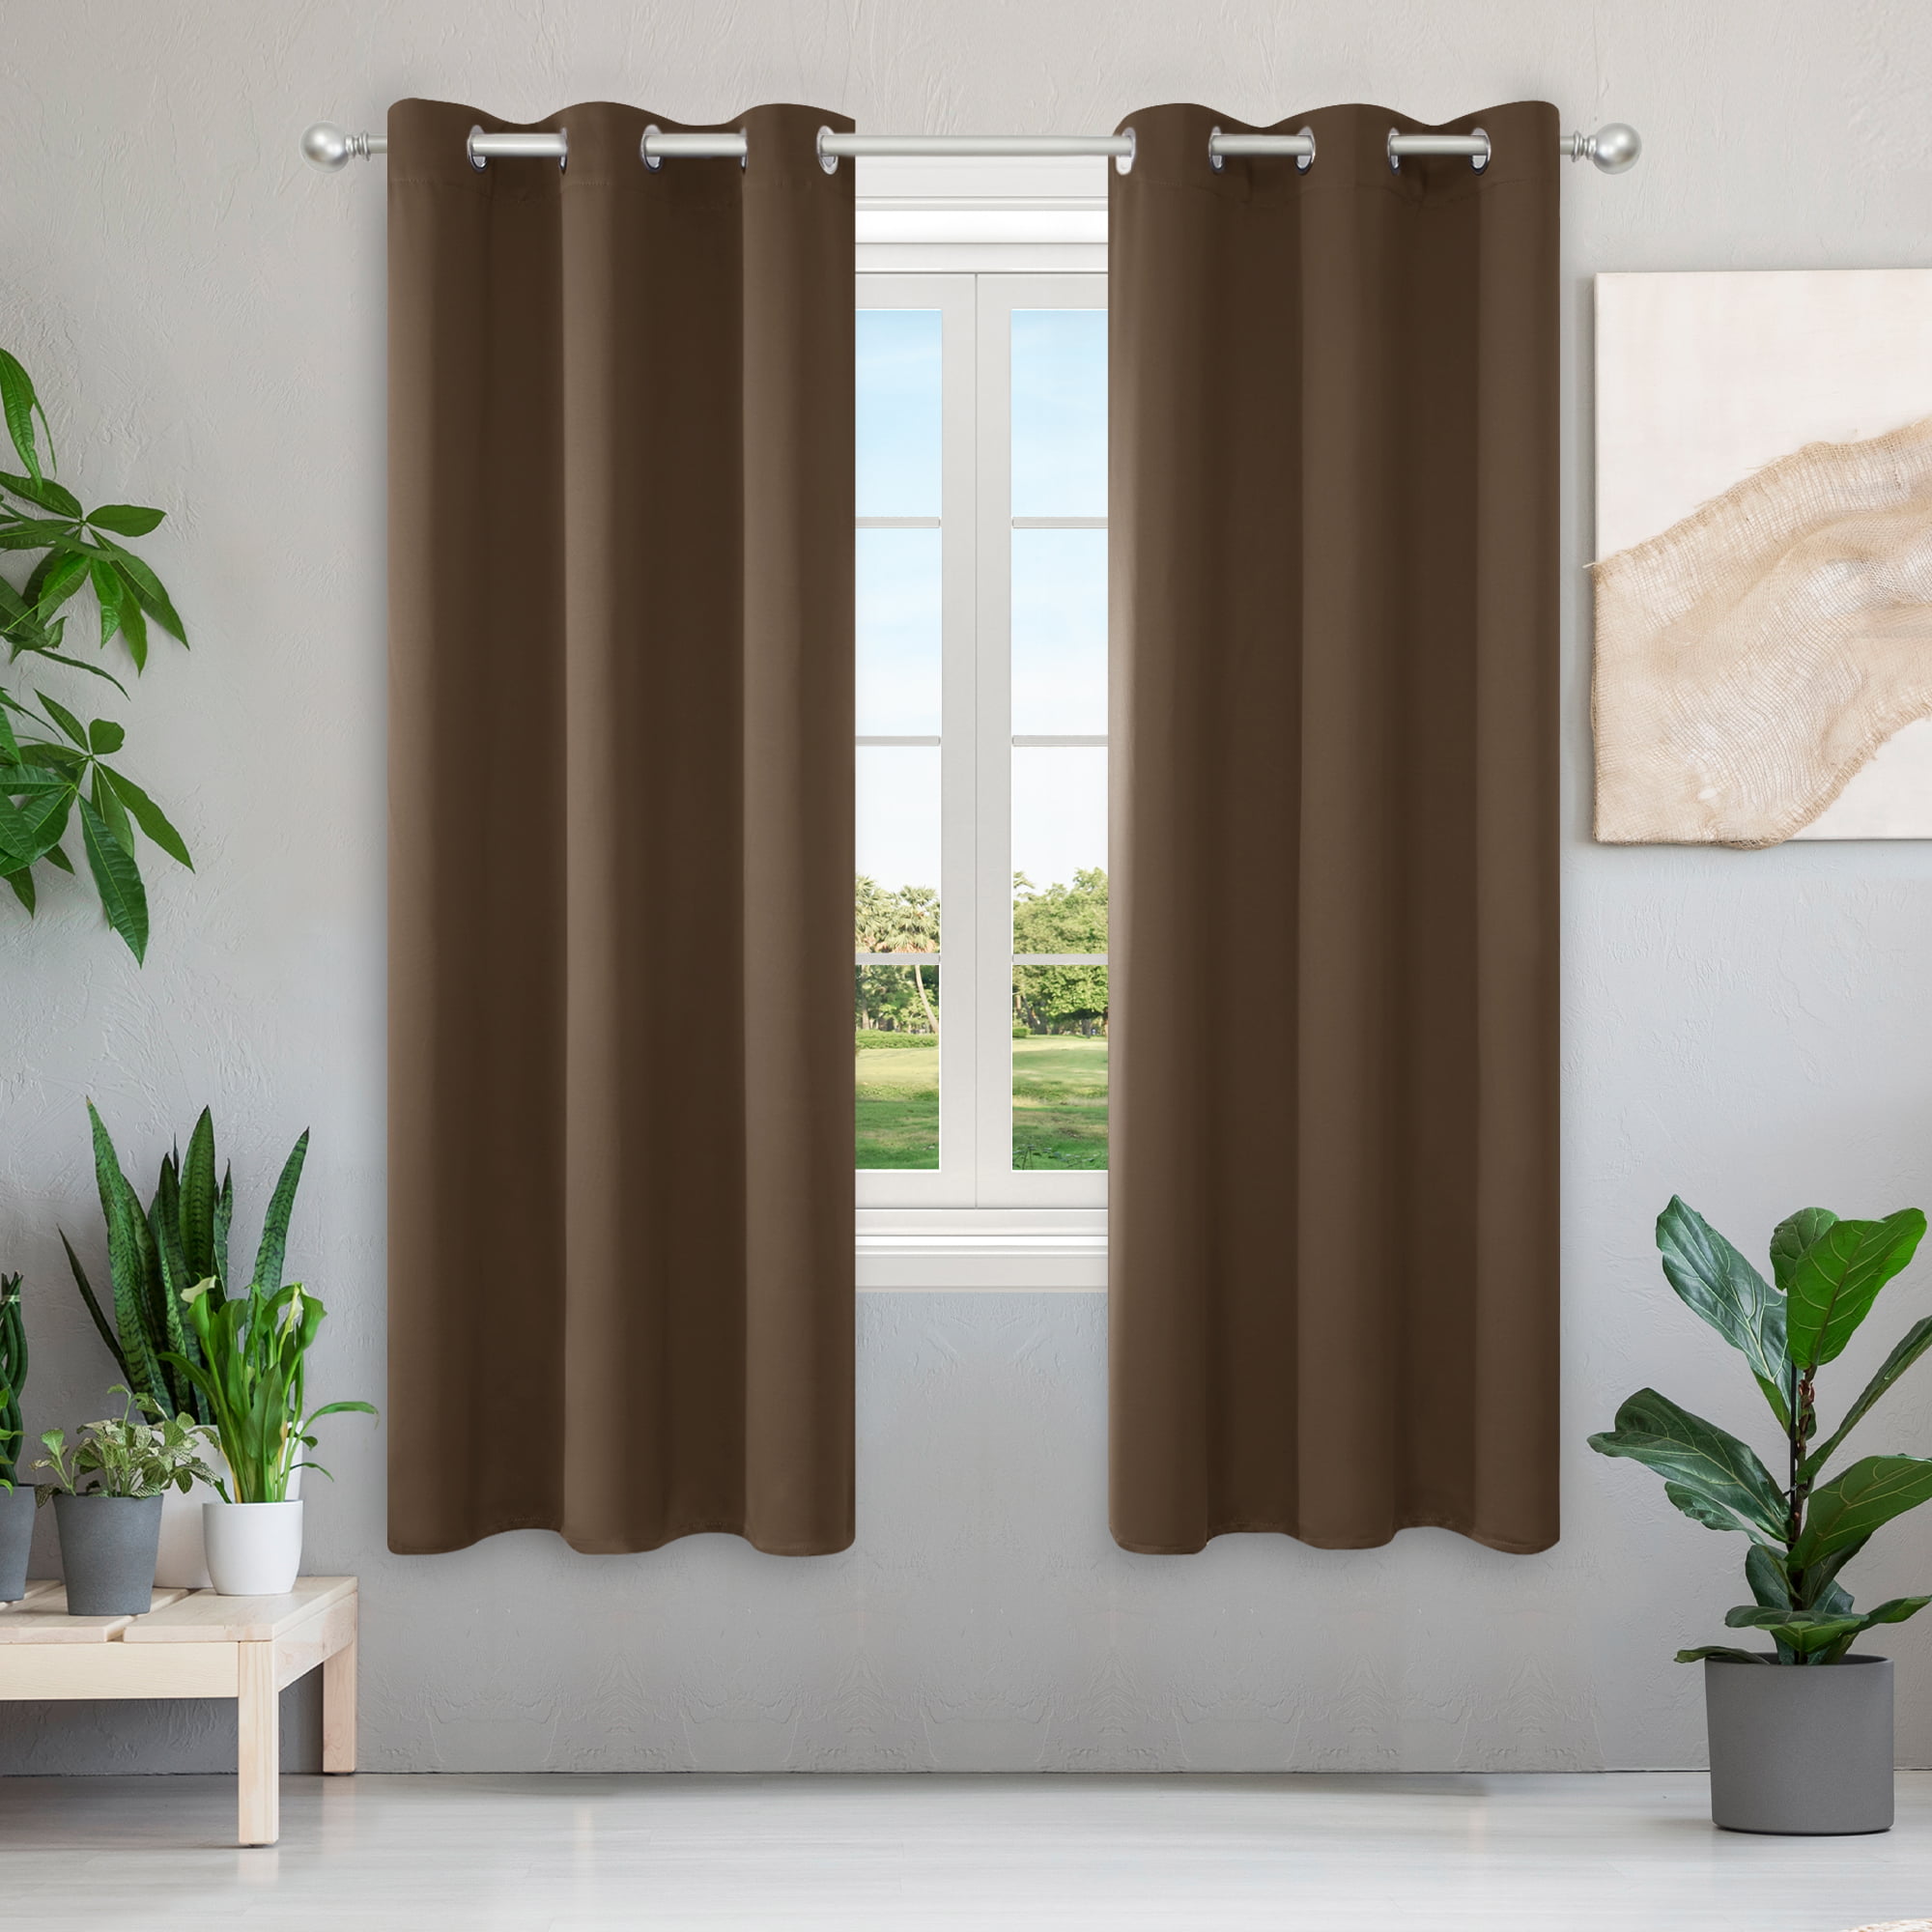 1 SET INSULATE THERMAL SHORT UNLINED PANELS WINDOW CURTAIN 100% BLACKOUT 54" L 